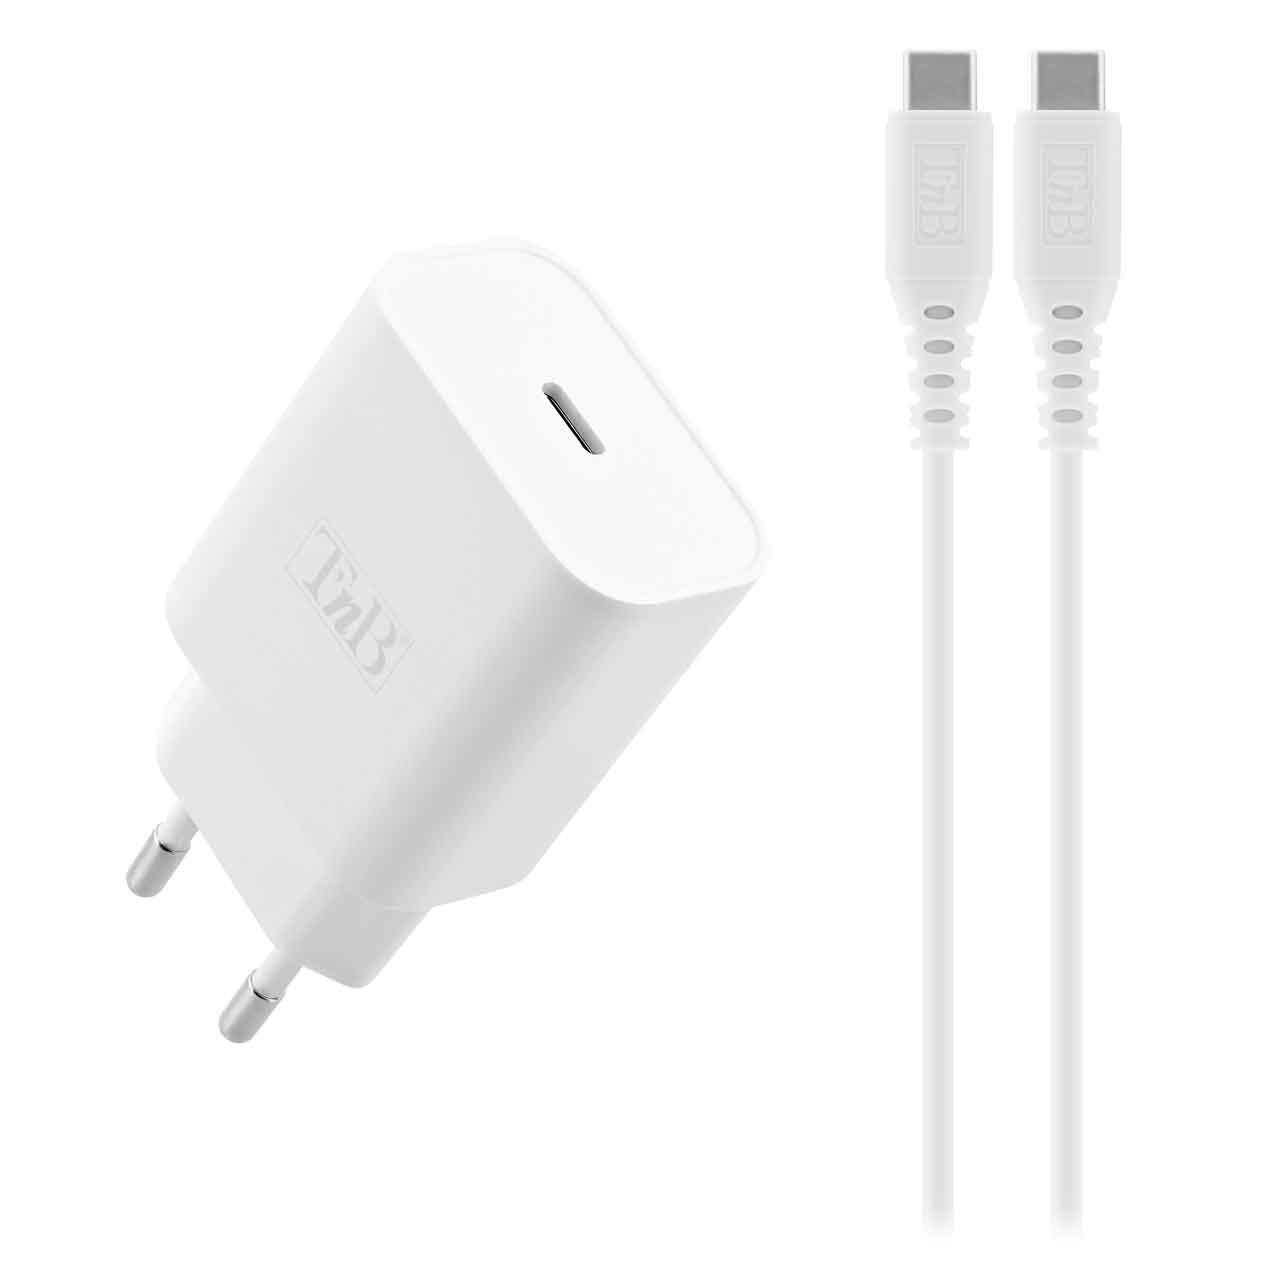 TNB CHPDTC20 USB-C POWER DELIVERY 20W WALL CHARGER + USB-C TO USB-C CABLE